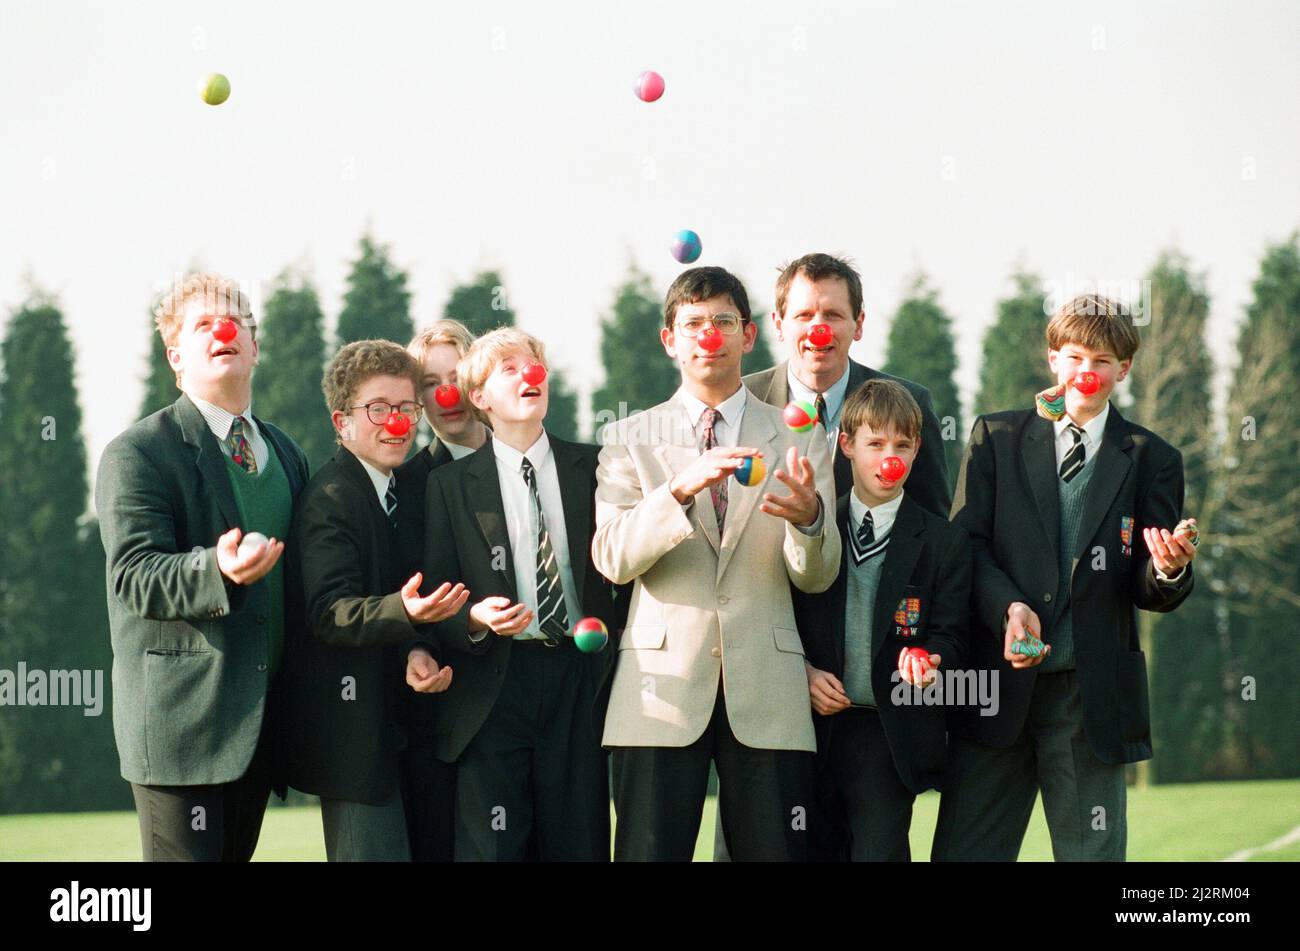 Jason Willis-Lee leads the team of jugglers from King Edward VI Five Ways School in their attempt to juggle up Mount Snowdon to raise funds for Comic Relief. Other members in the team are - Nick Russell, Matthew Joy, James Henderson, Paul Wright, Robert Hack, Martyn Vitty and the teacher in charge, Mr John Marston. 9th March 1993. Stock Photo